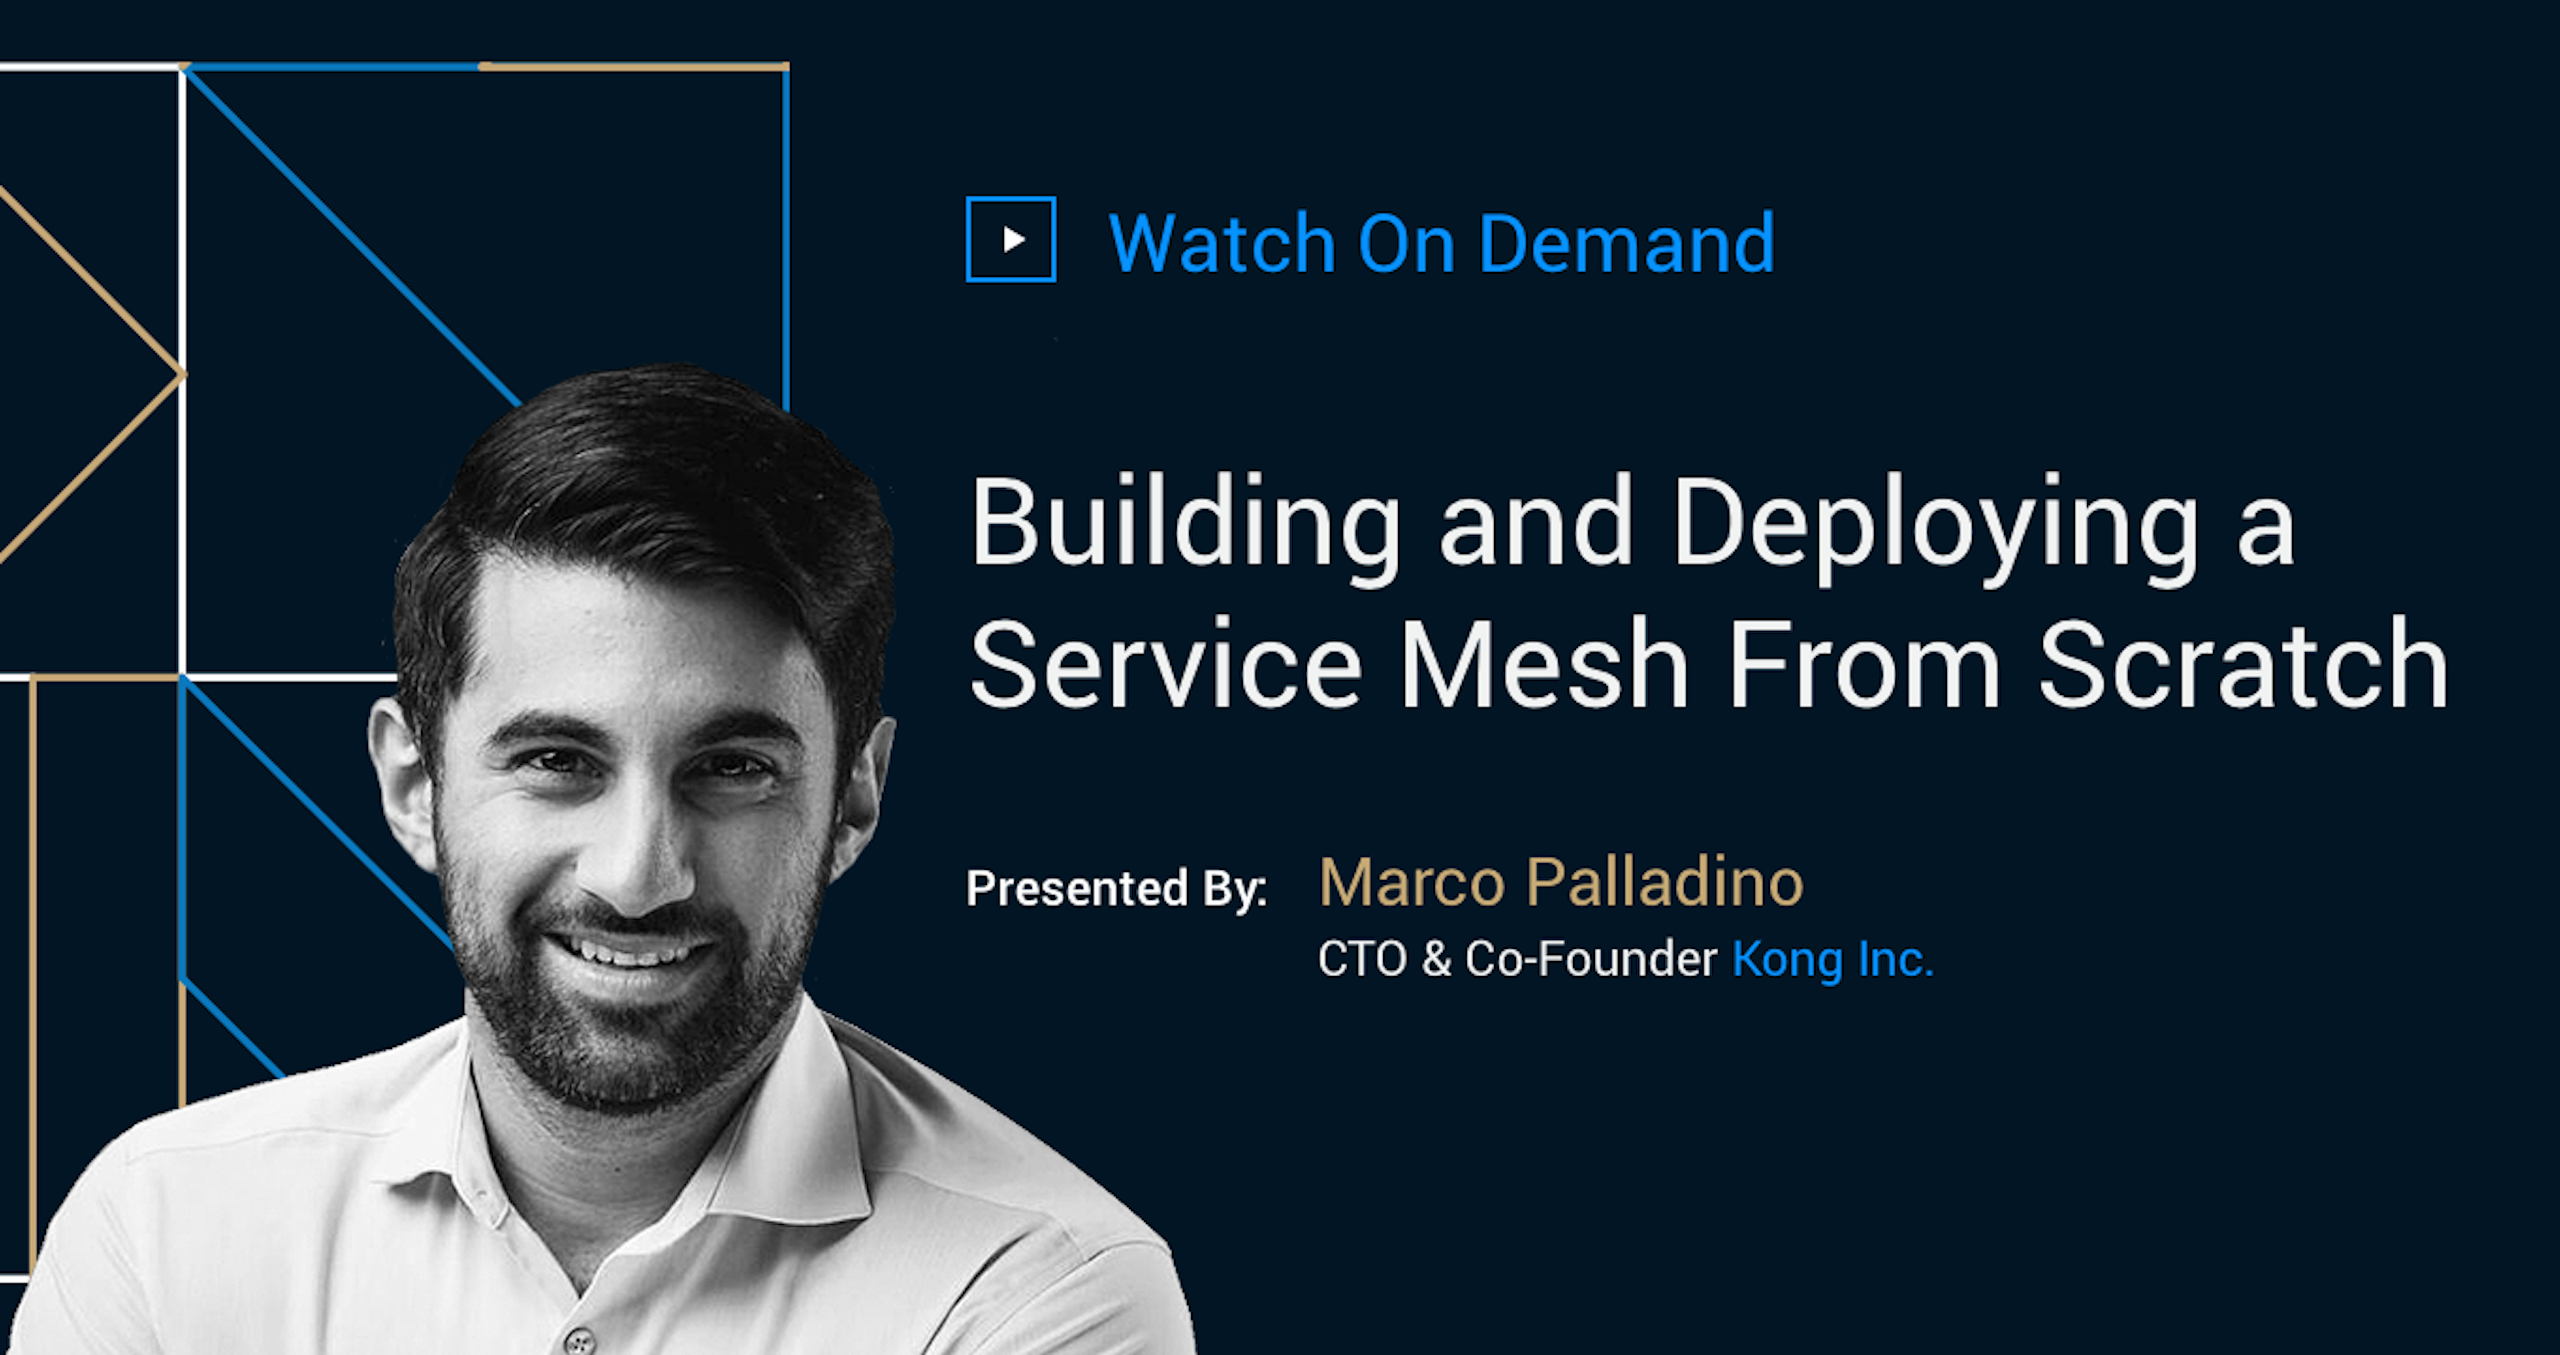 Building and Deploying a Service Mesh From Scratch